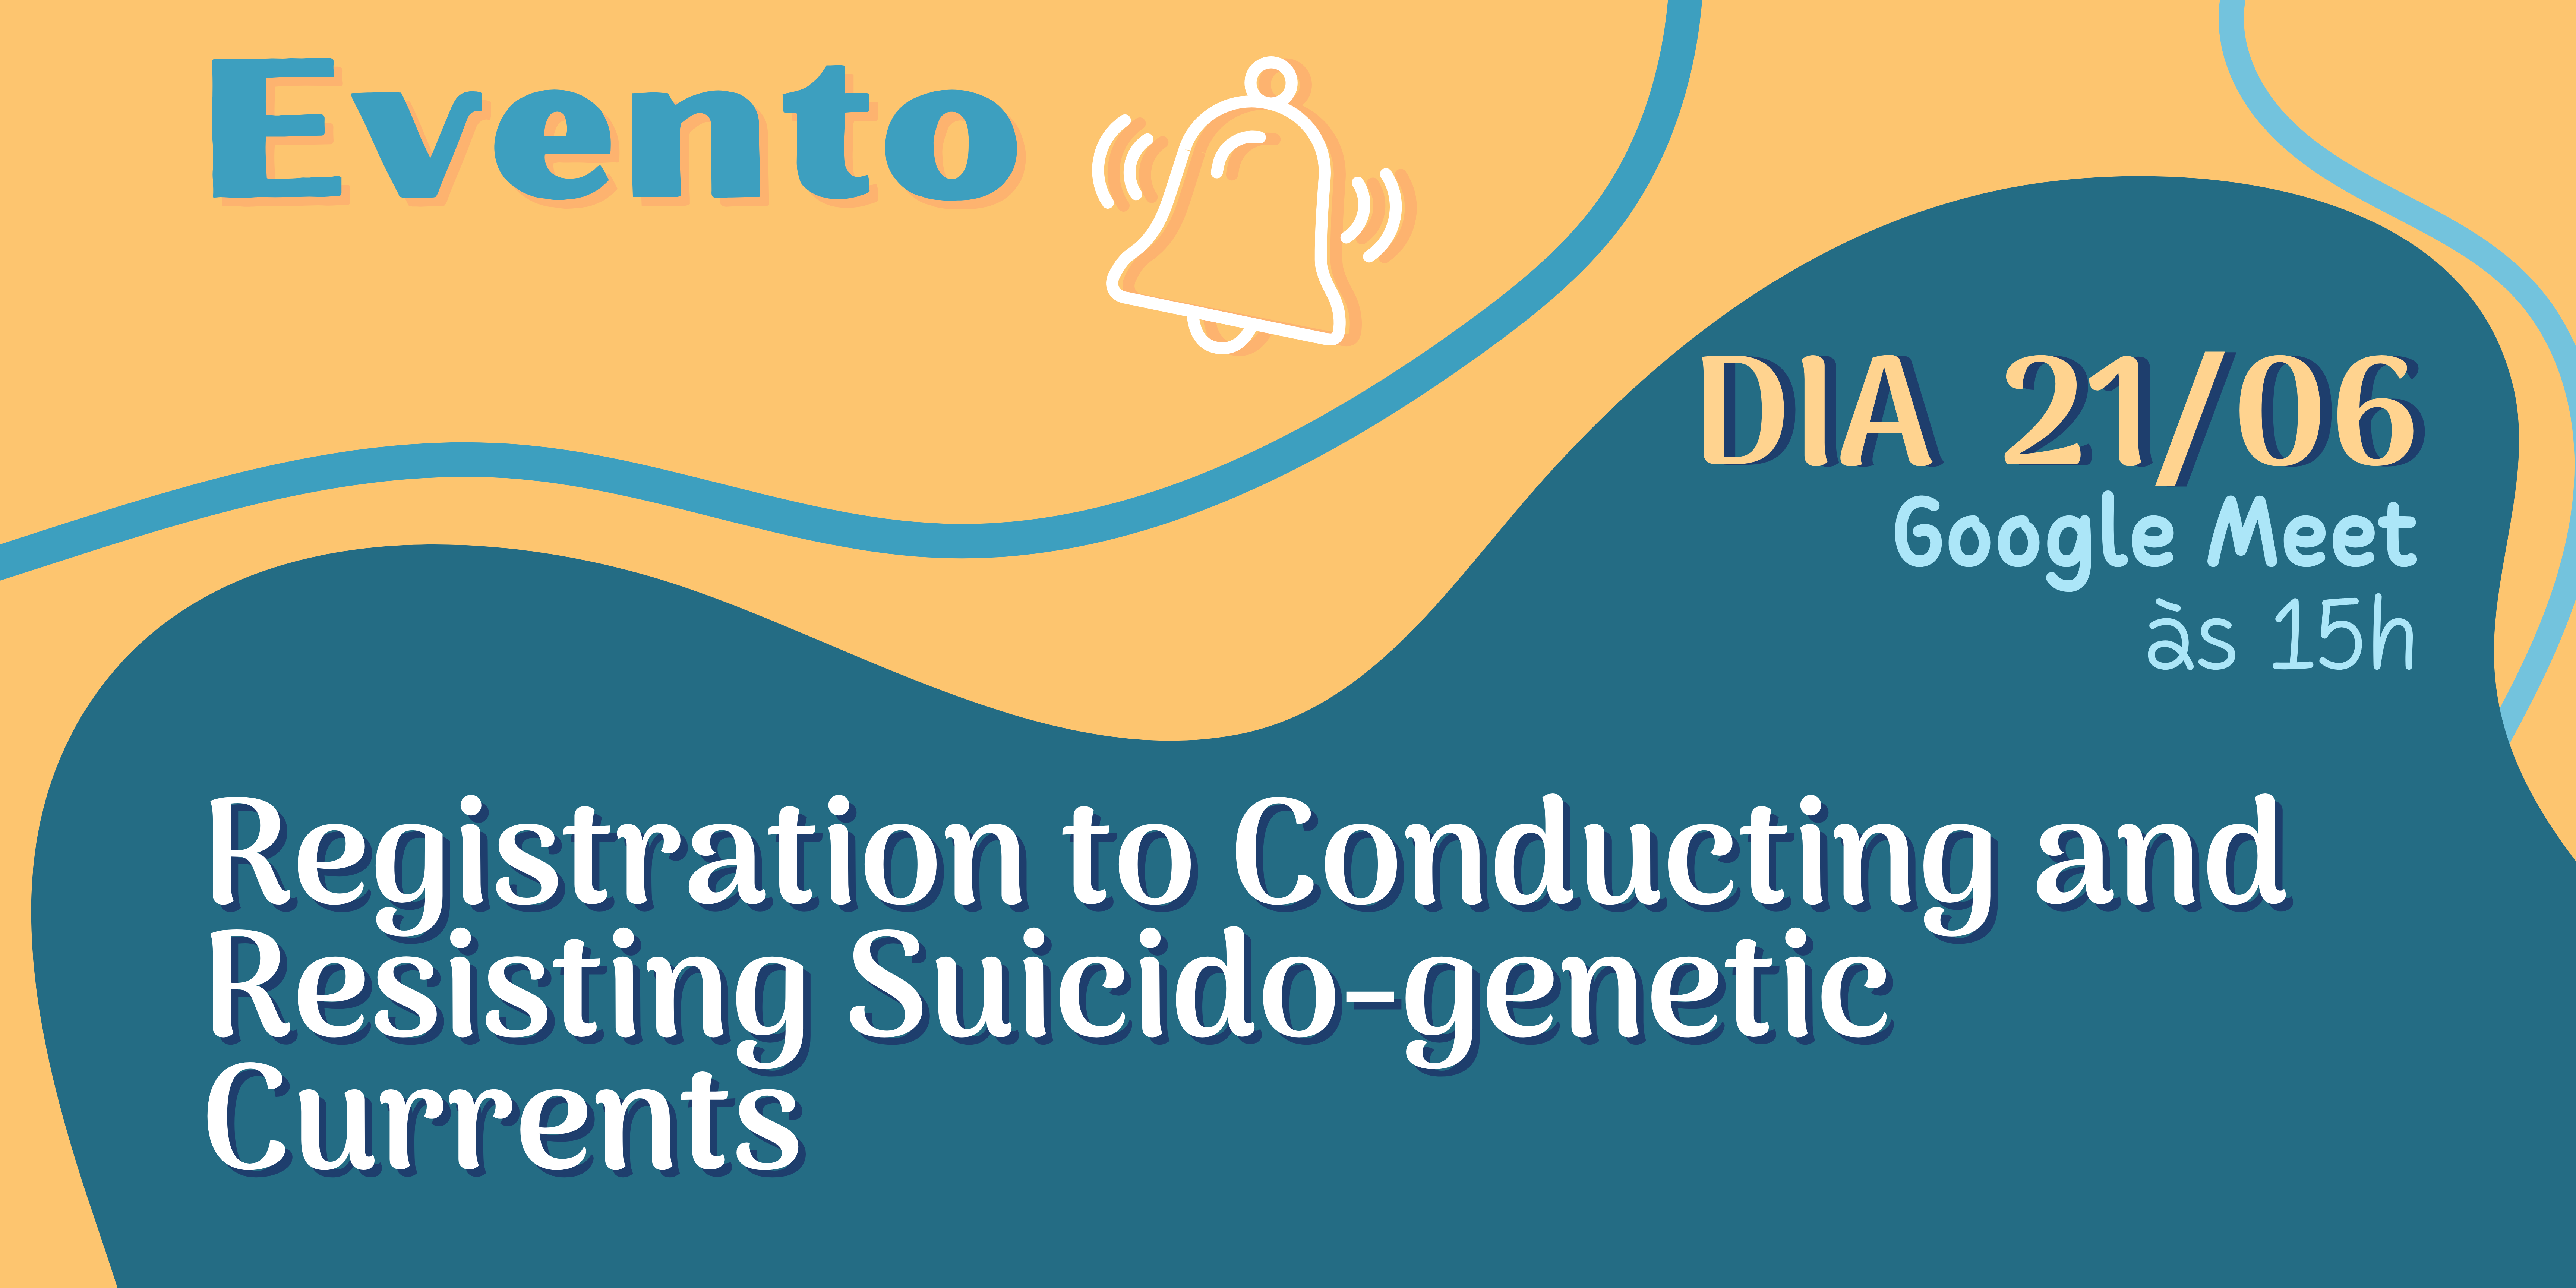 Registration to Conducting and Resisting Suicido-genetic Currents